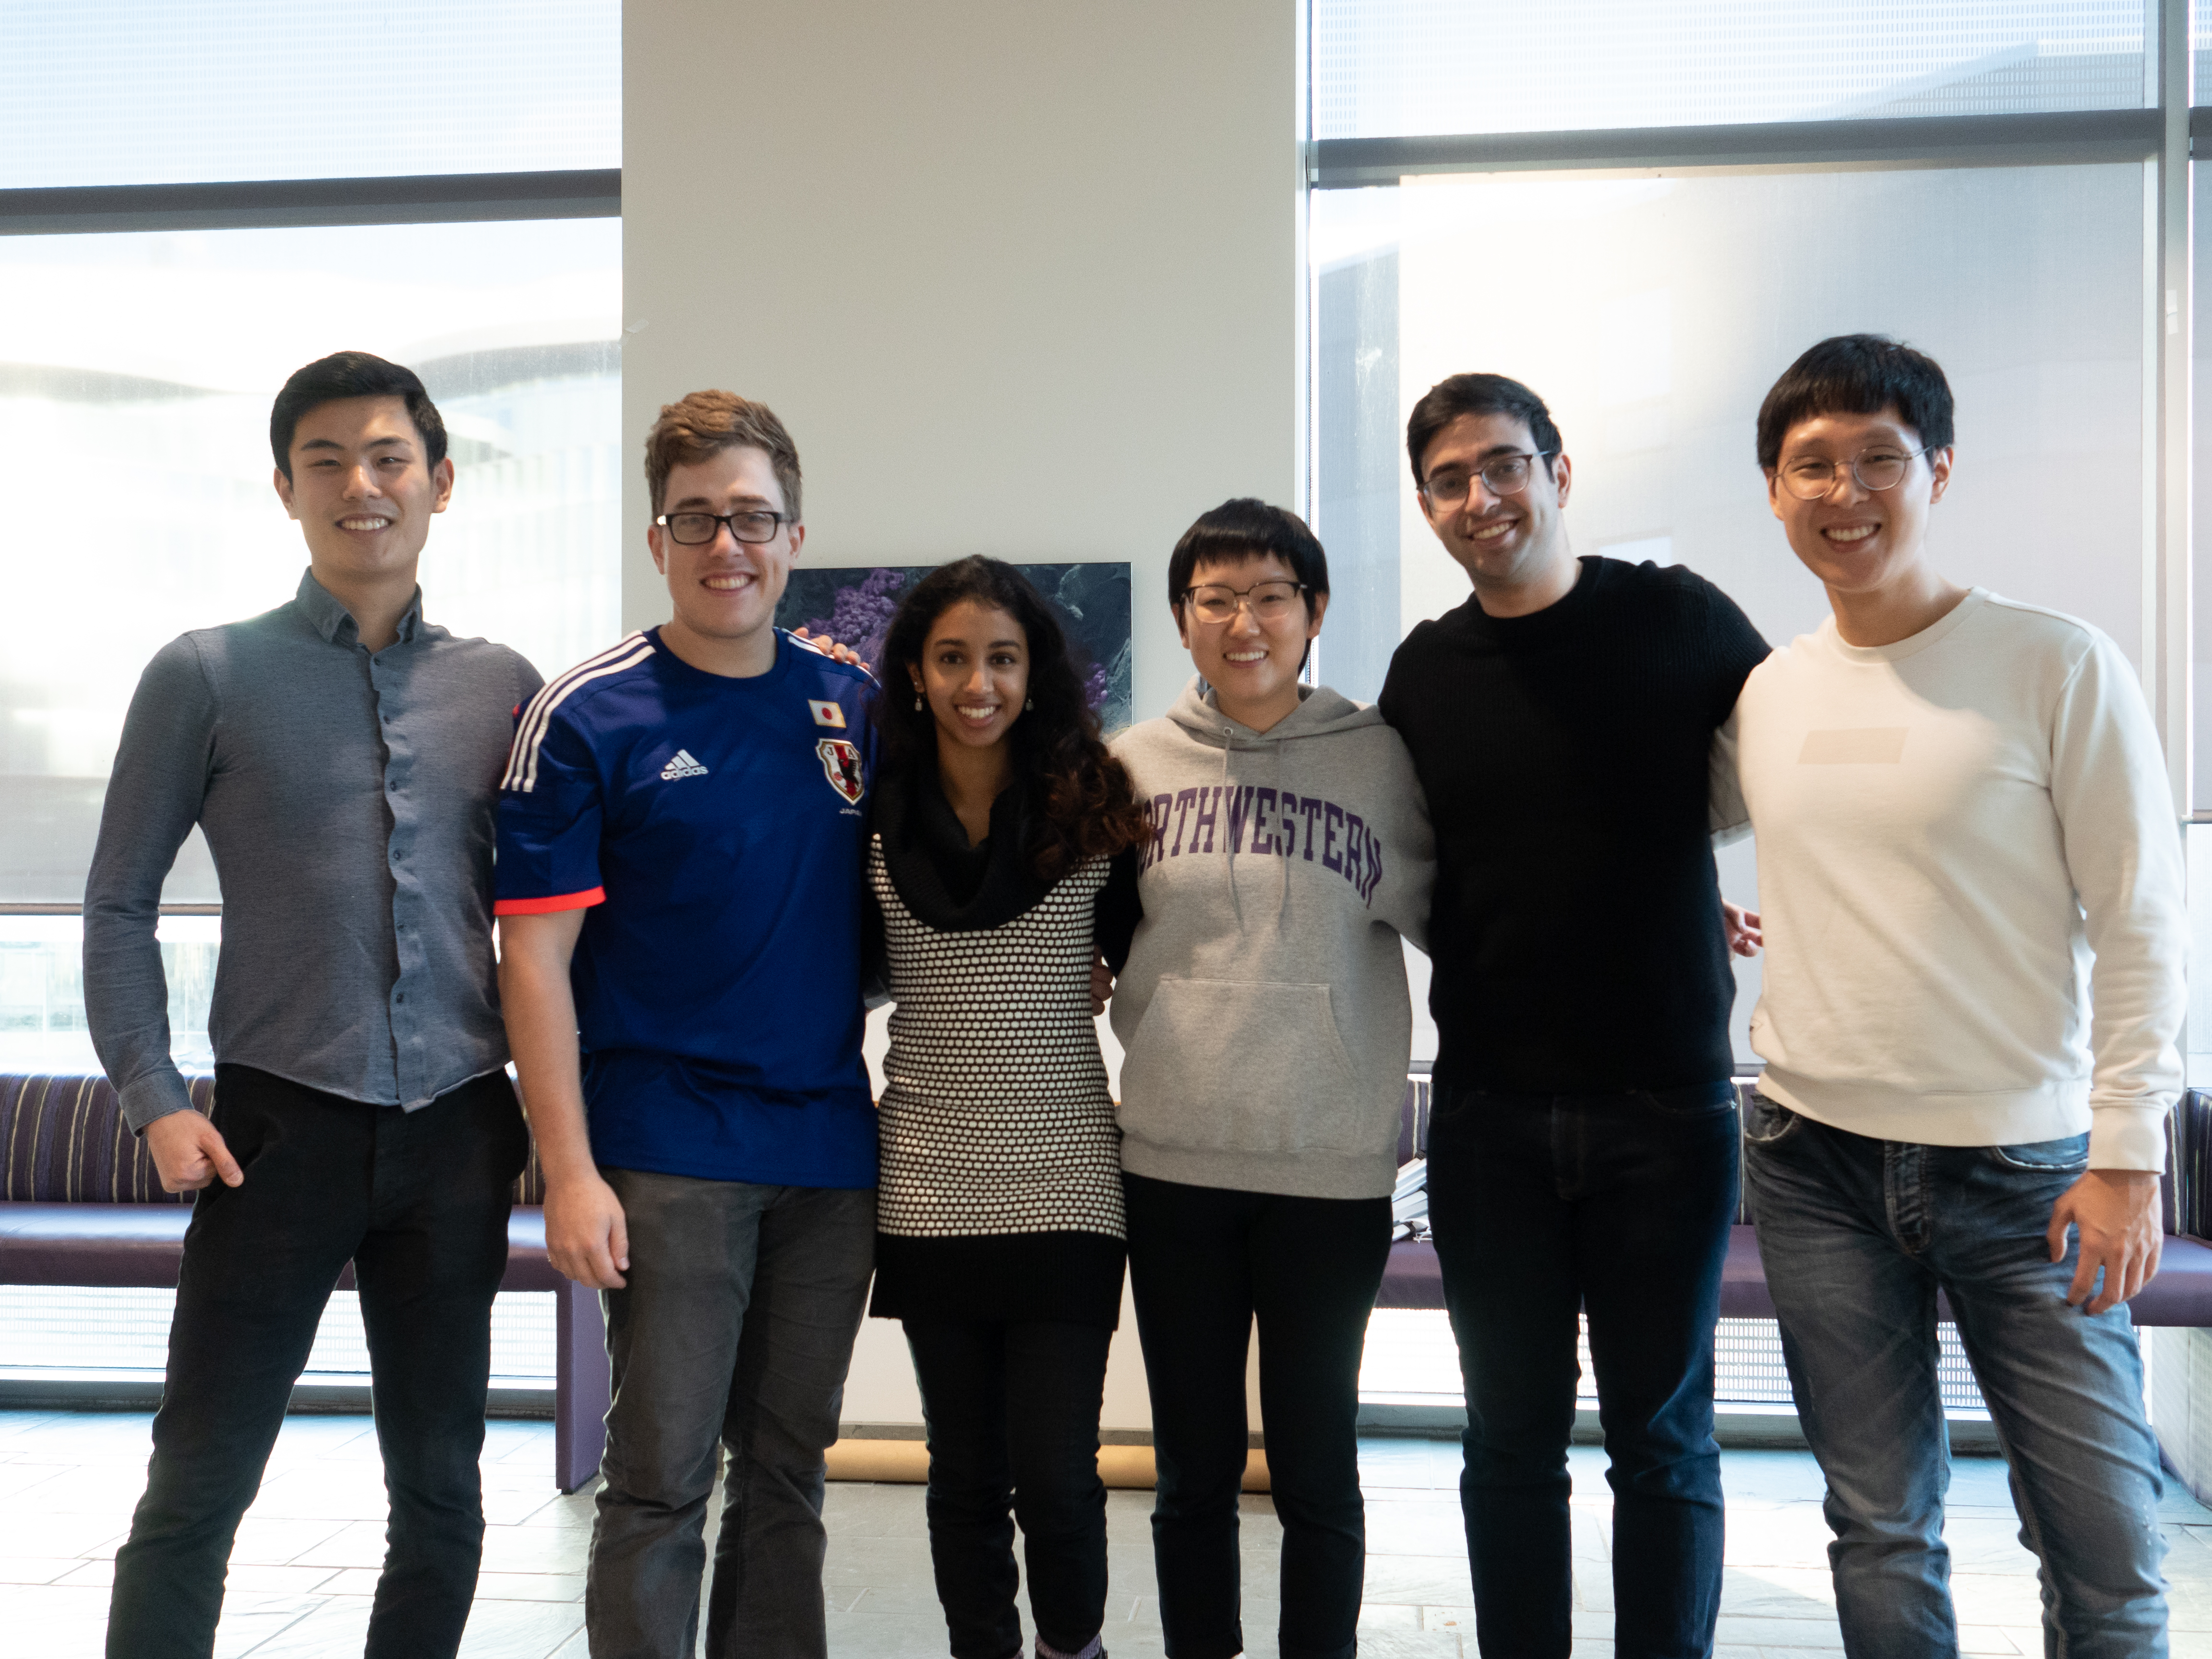 The MSUS Poster Competition Organizers, from left to right: Louis Wang, J. Tyler Gish, Sonal Rangnekar, Ju Ying Shang, Rustin Golnabi, Wooje Chang. Not pictured: James Male